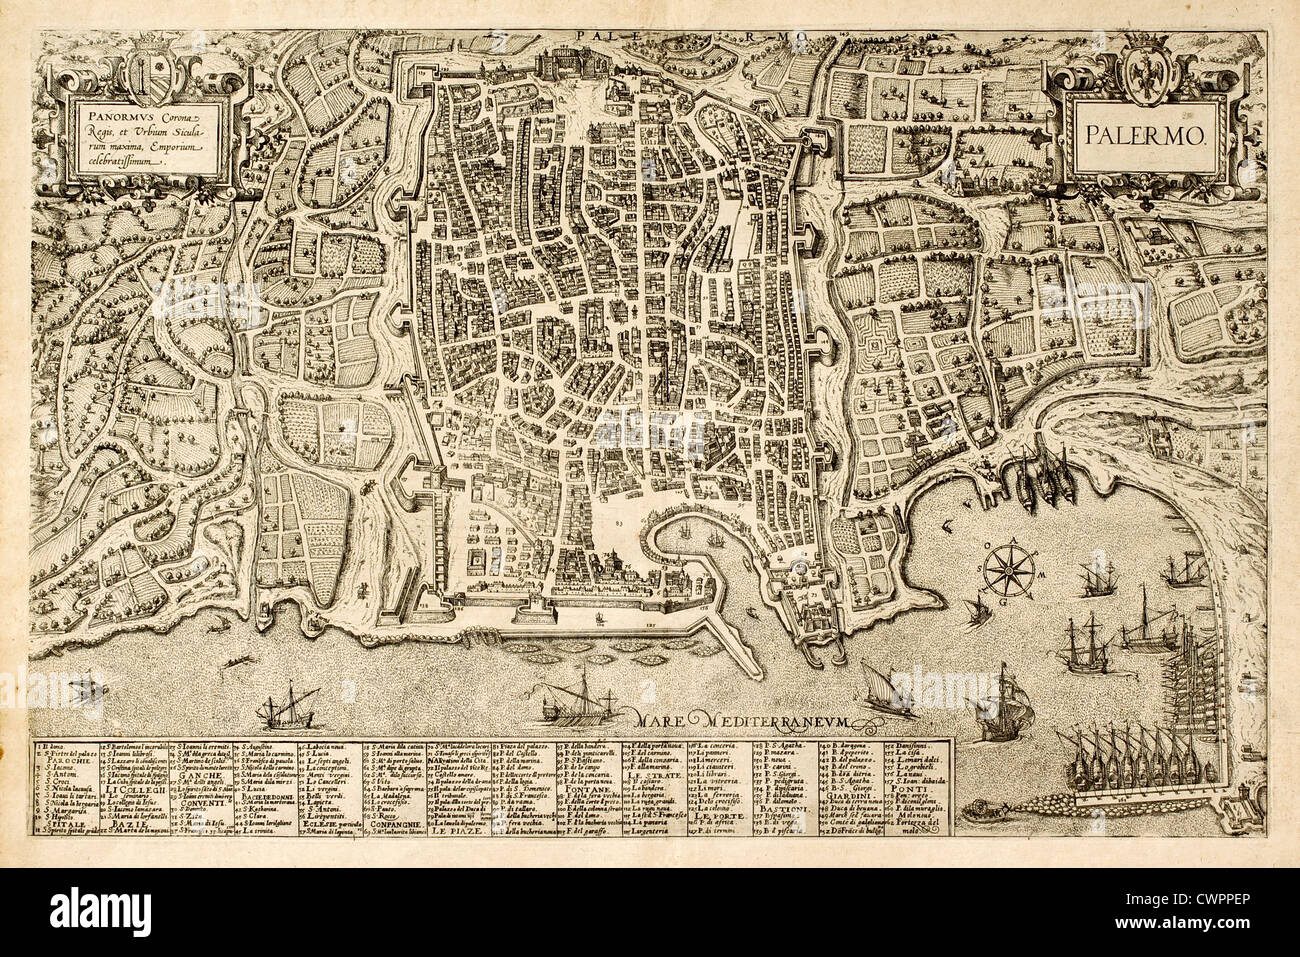 Antique map of Palermo Stock Photo